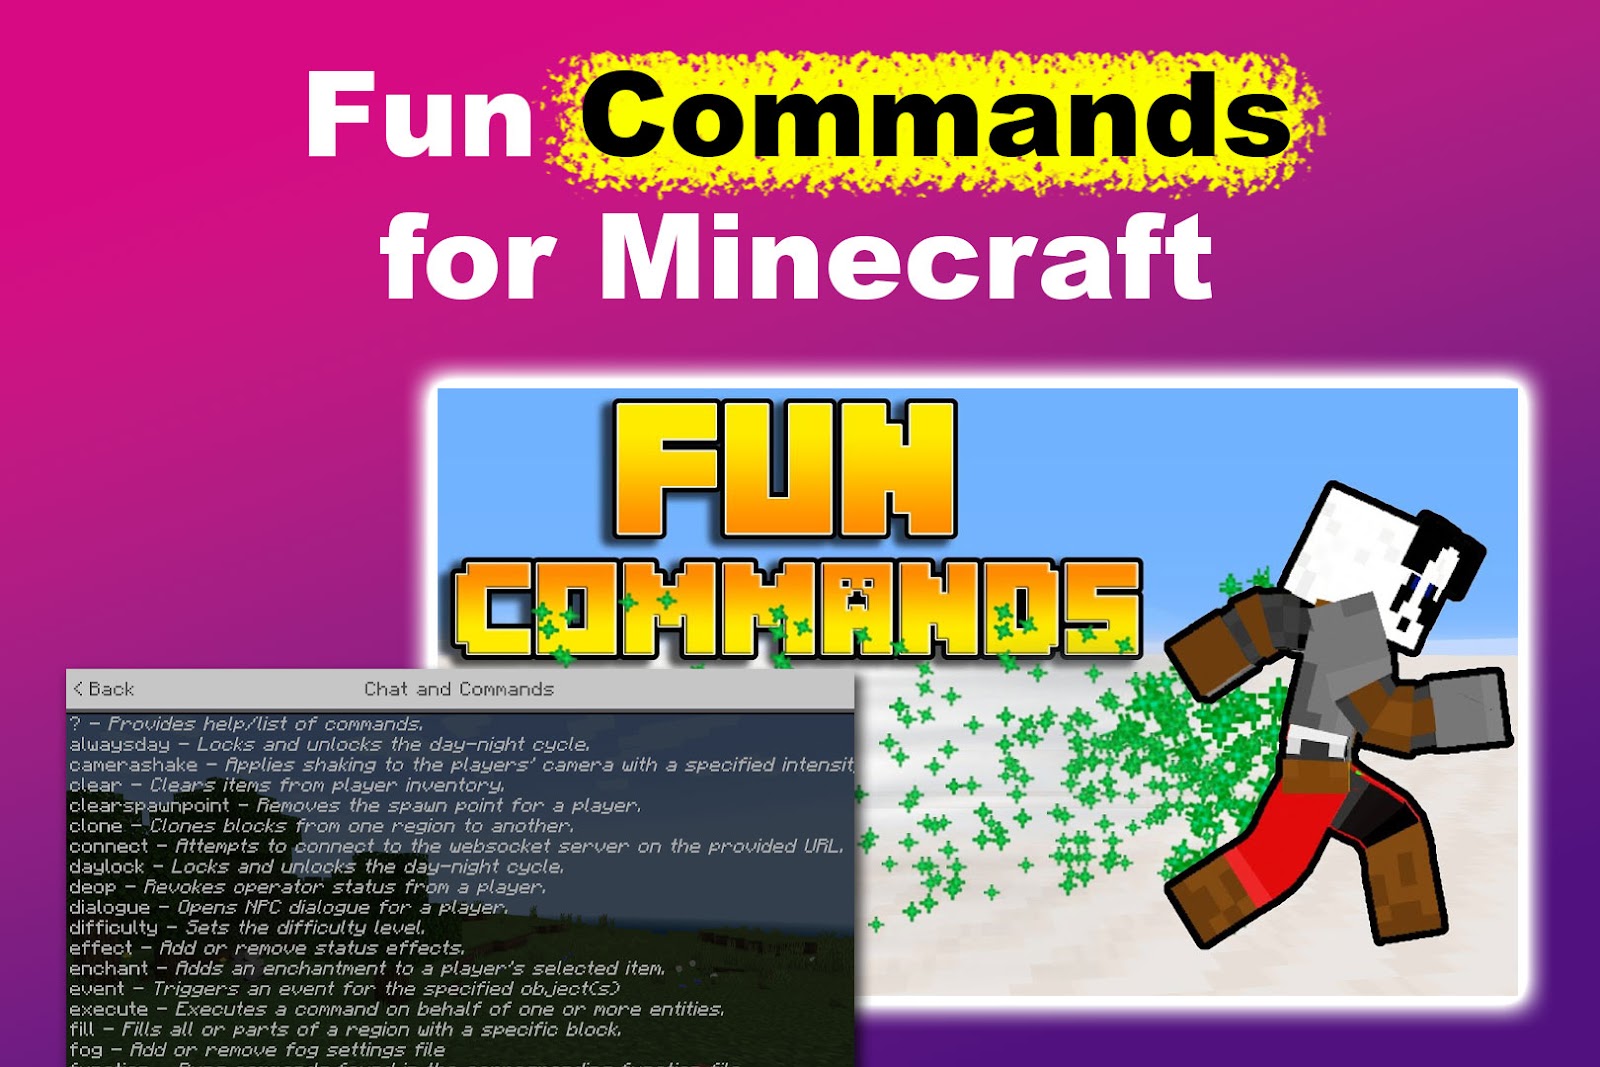 Fun Commands for Minecraft